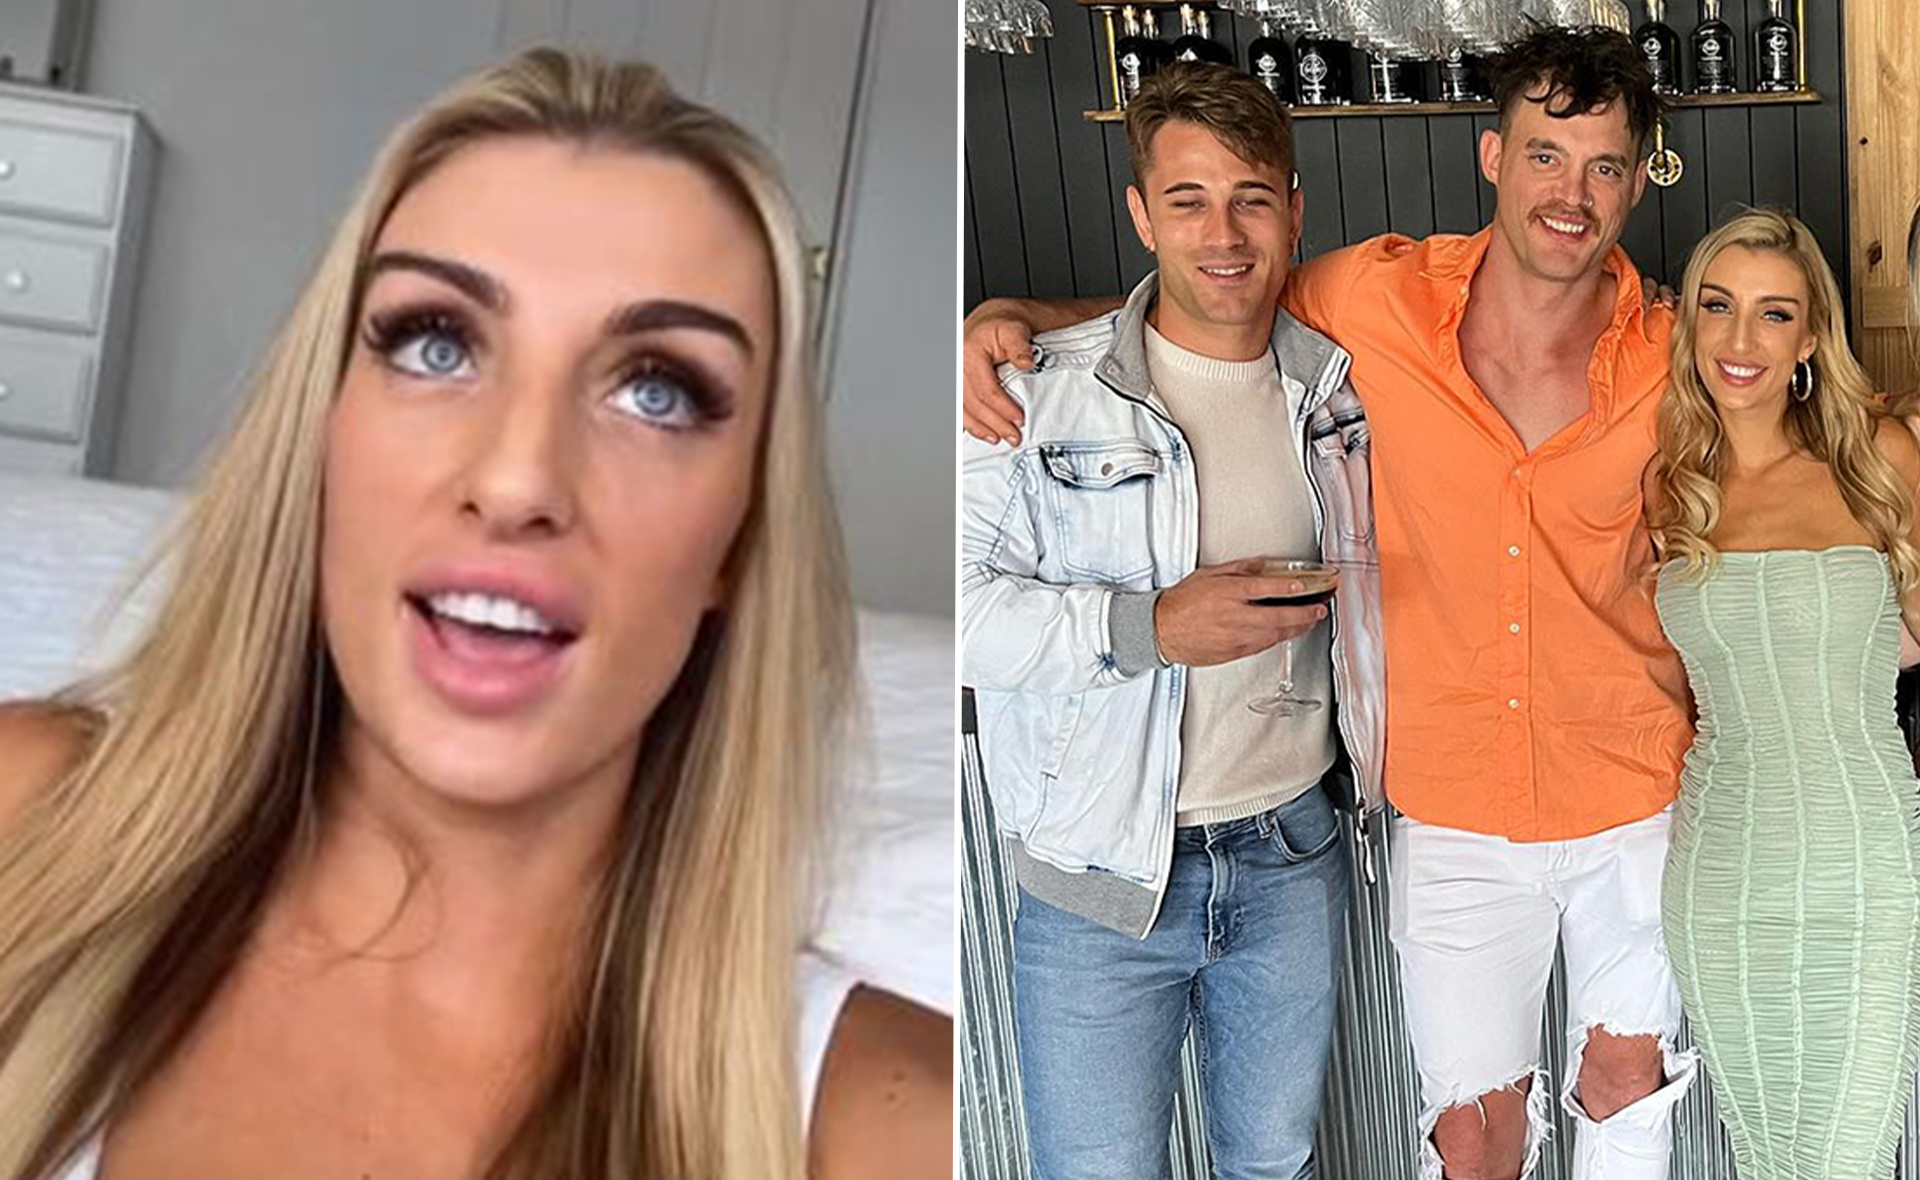 MAFS’ Tamara Djordjevic reveals where she REALLY stands with Mitch Eynaud following dating rumours